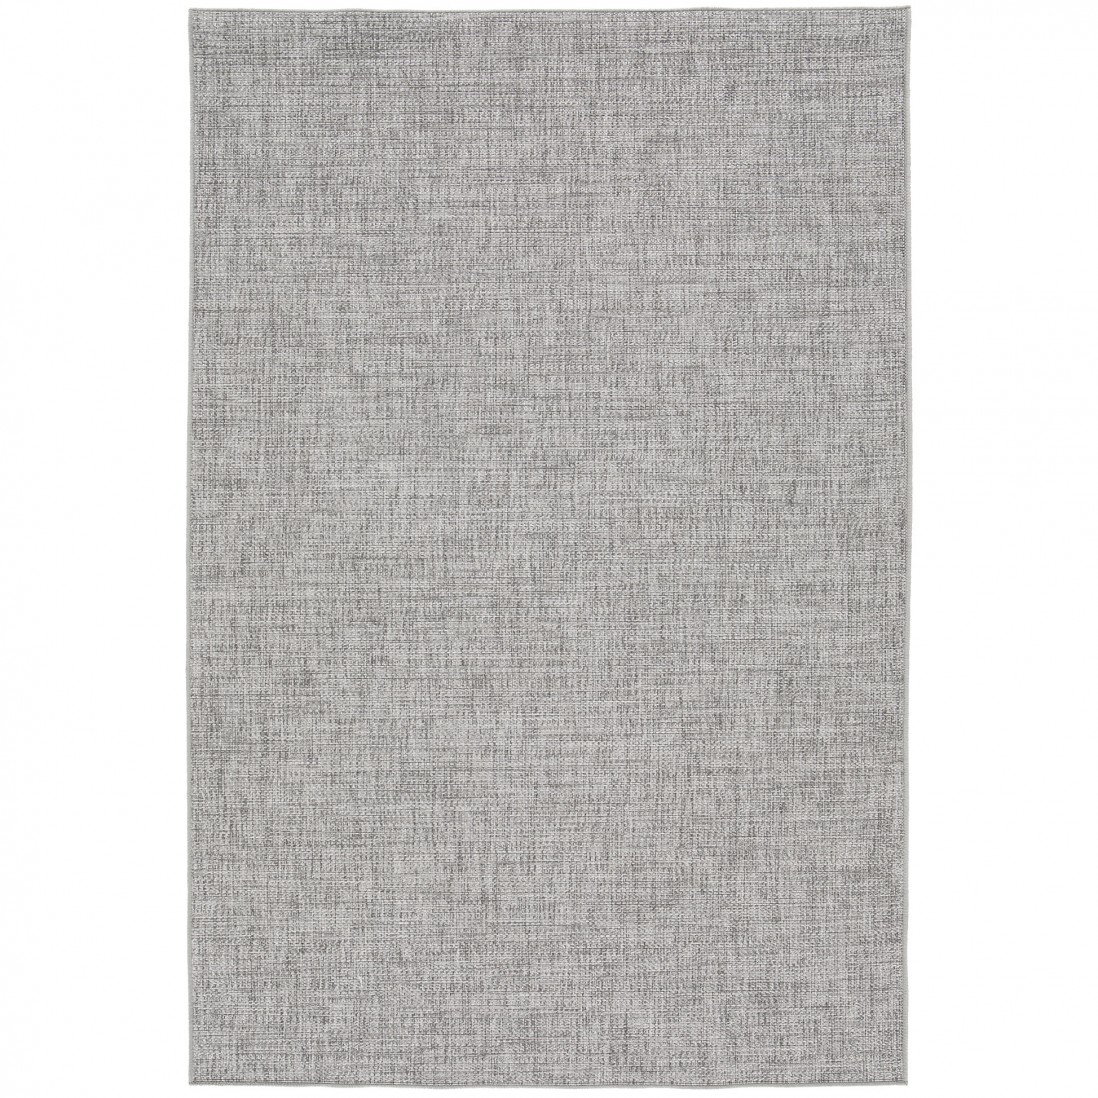 NOBLE 36307/061 AREA RUG